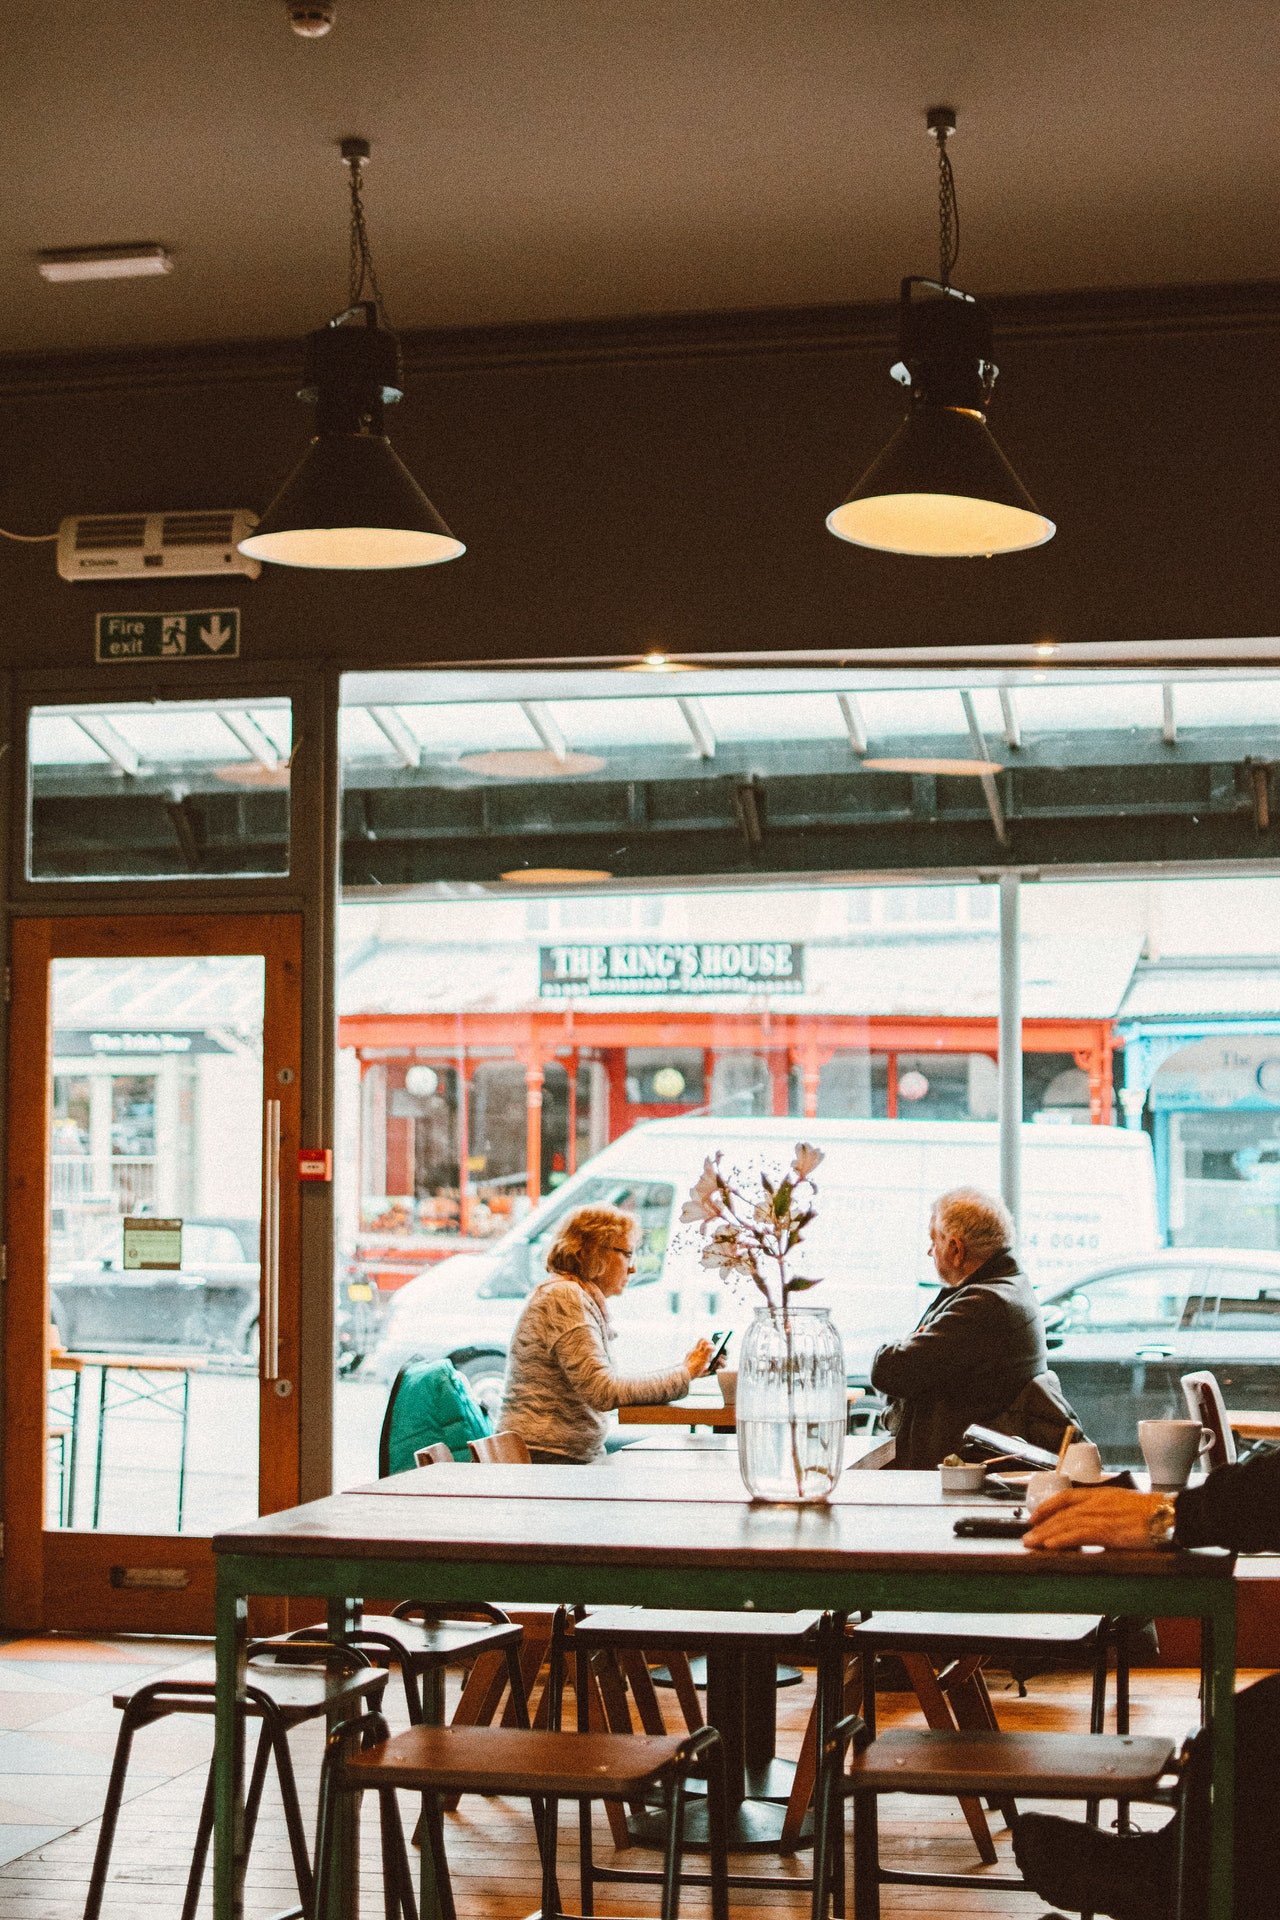 An elderly couple sitting by the window of a restaurant | Source: Pexels